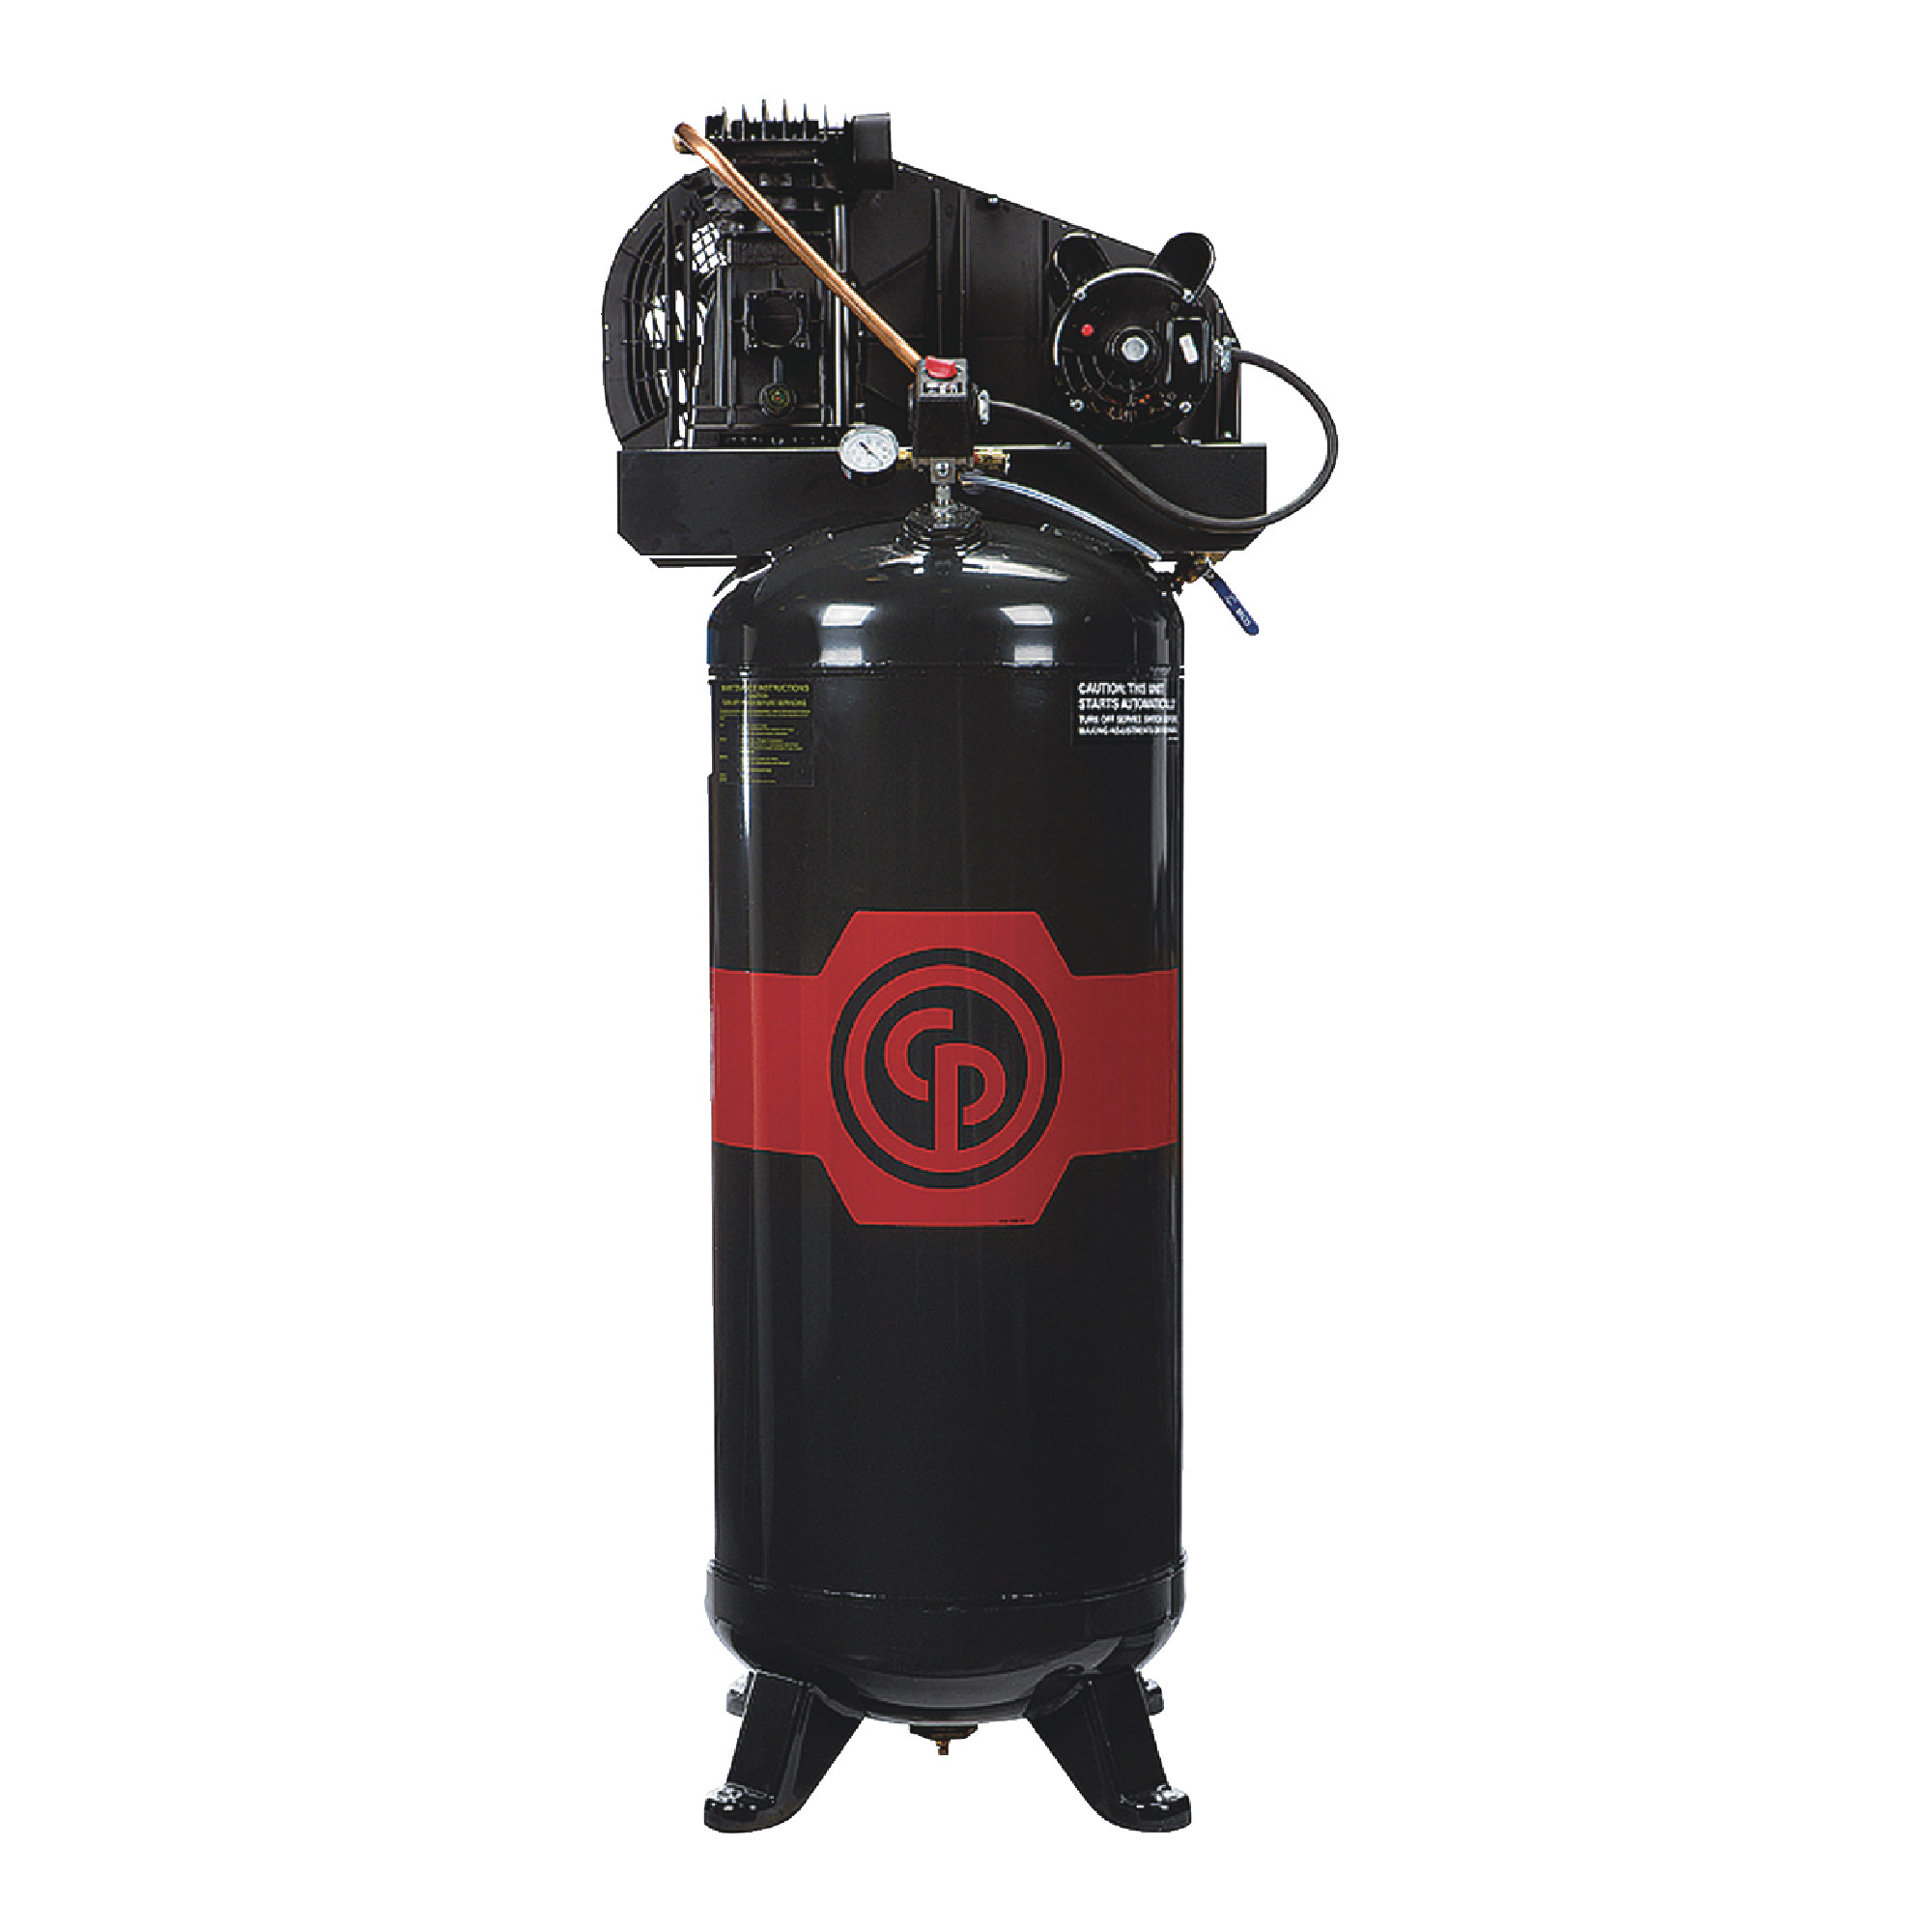 Two Stage Electric Reciprocating Air Compressor